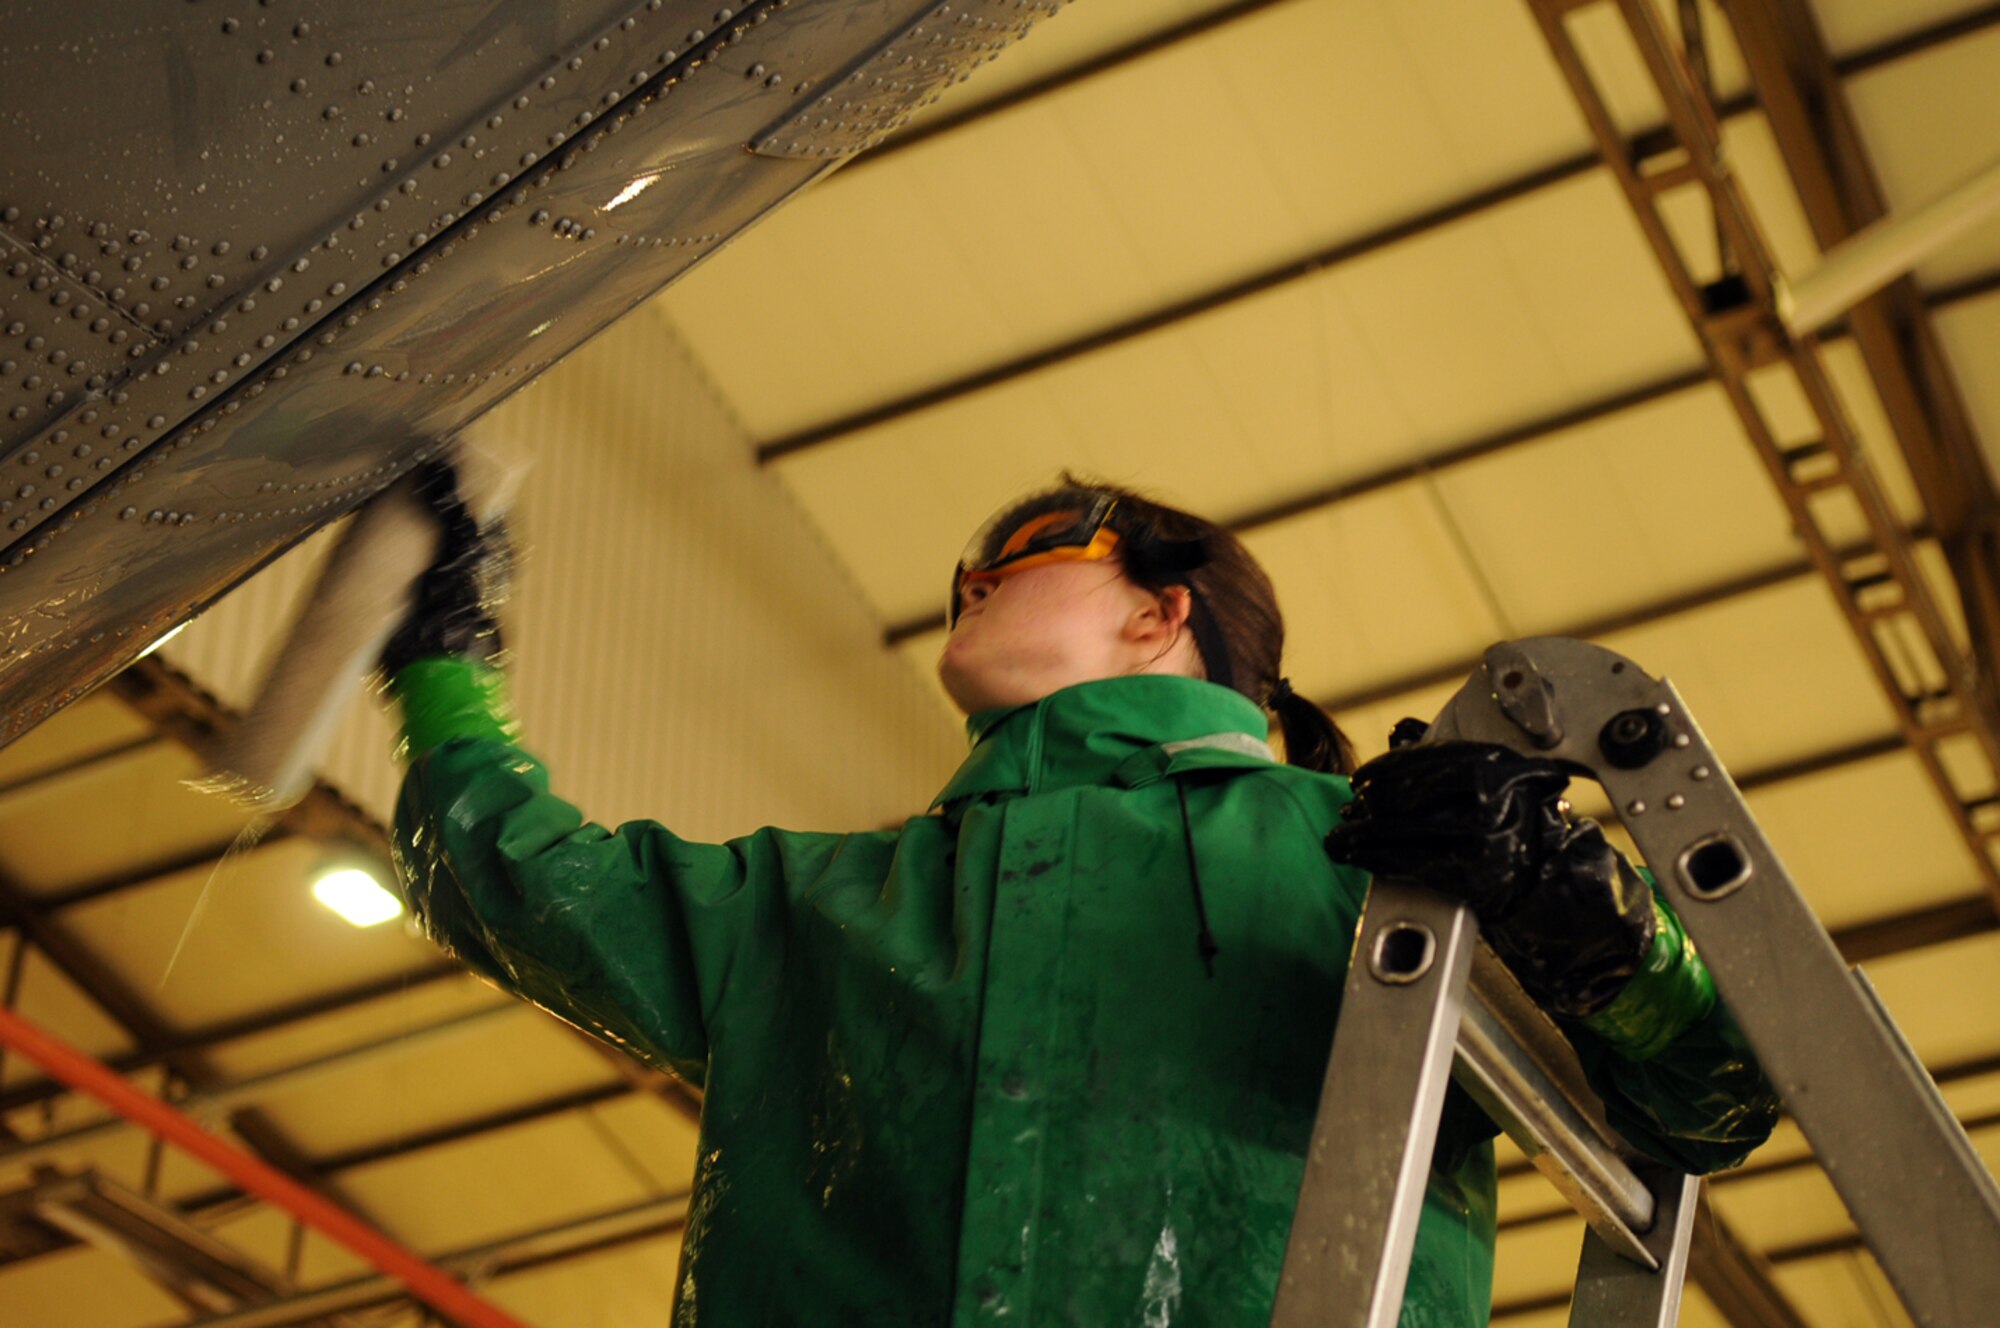 Airman 1st Class Stephanie Hall, 86th Aircraft Maintenance Squadron crew chief, goes up on a ladder to wash the tail end of a C-130E Hercules in Hangar 1, Ramstein Air Base, Germany, Oct. 28, 2008. The wash crew is made up of a 12-member team from the 86th AMXS who wash aircraft every 90 days to keep them mission ready. (U.S. Air Force photo by Airman 1st Class Scott Saldukas)